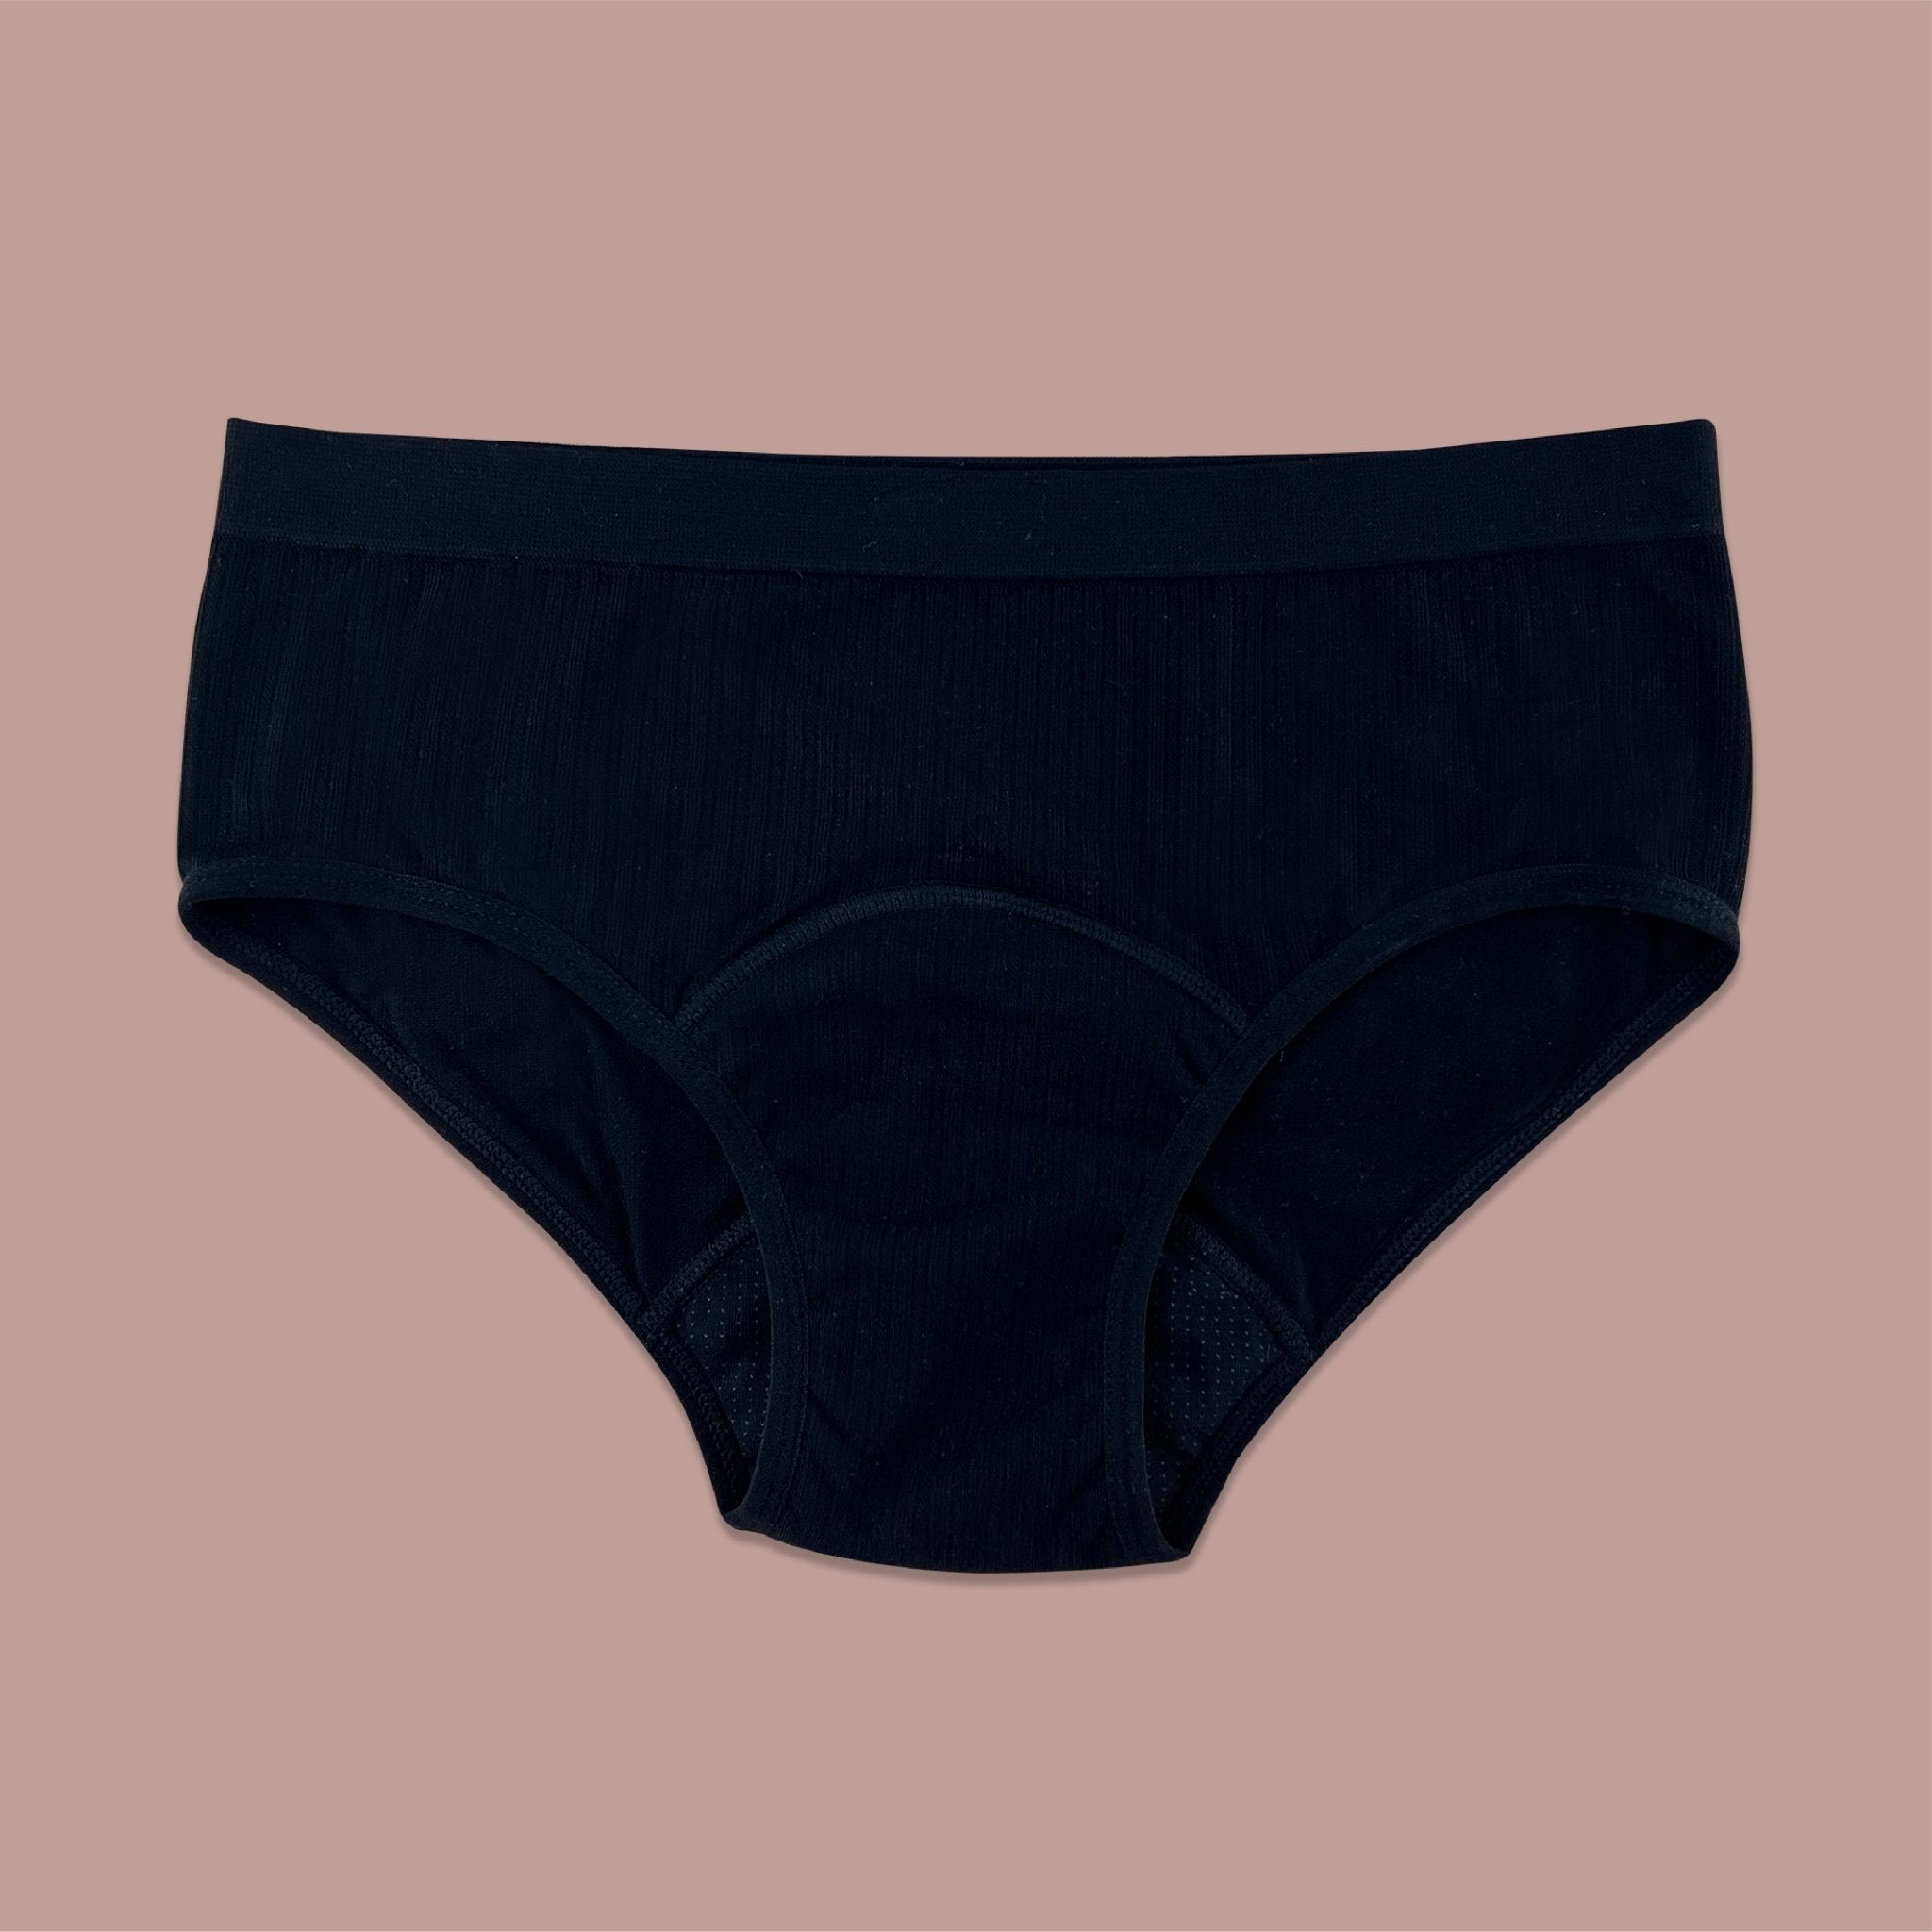 Never worry about period leaks again with THINX underwear.